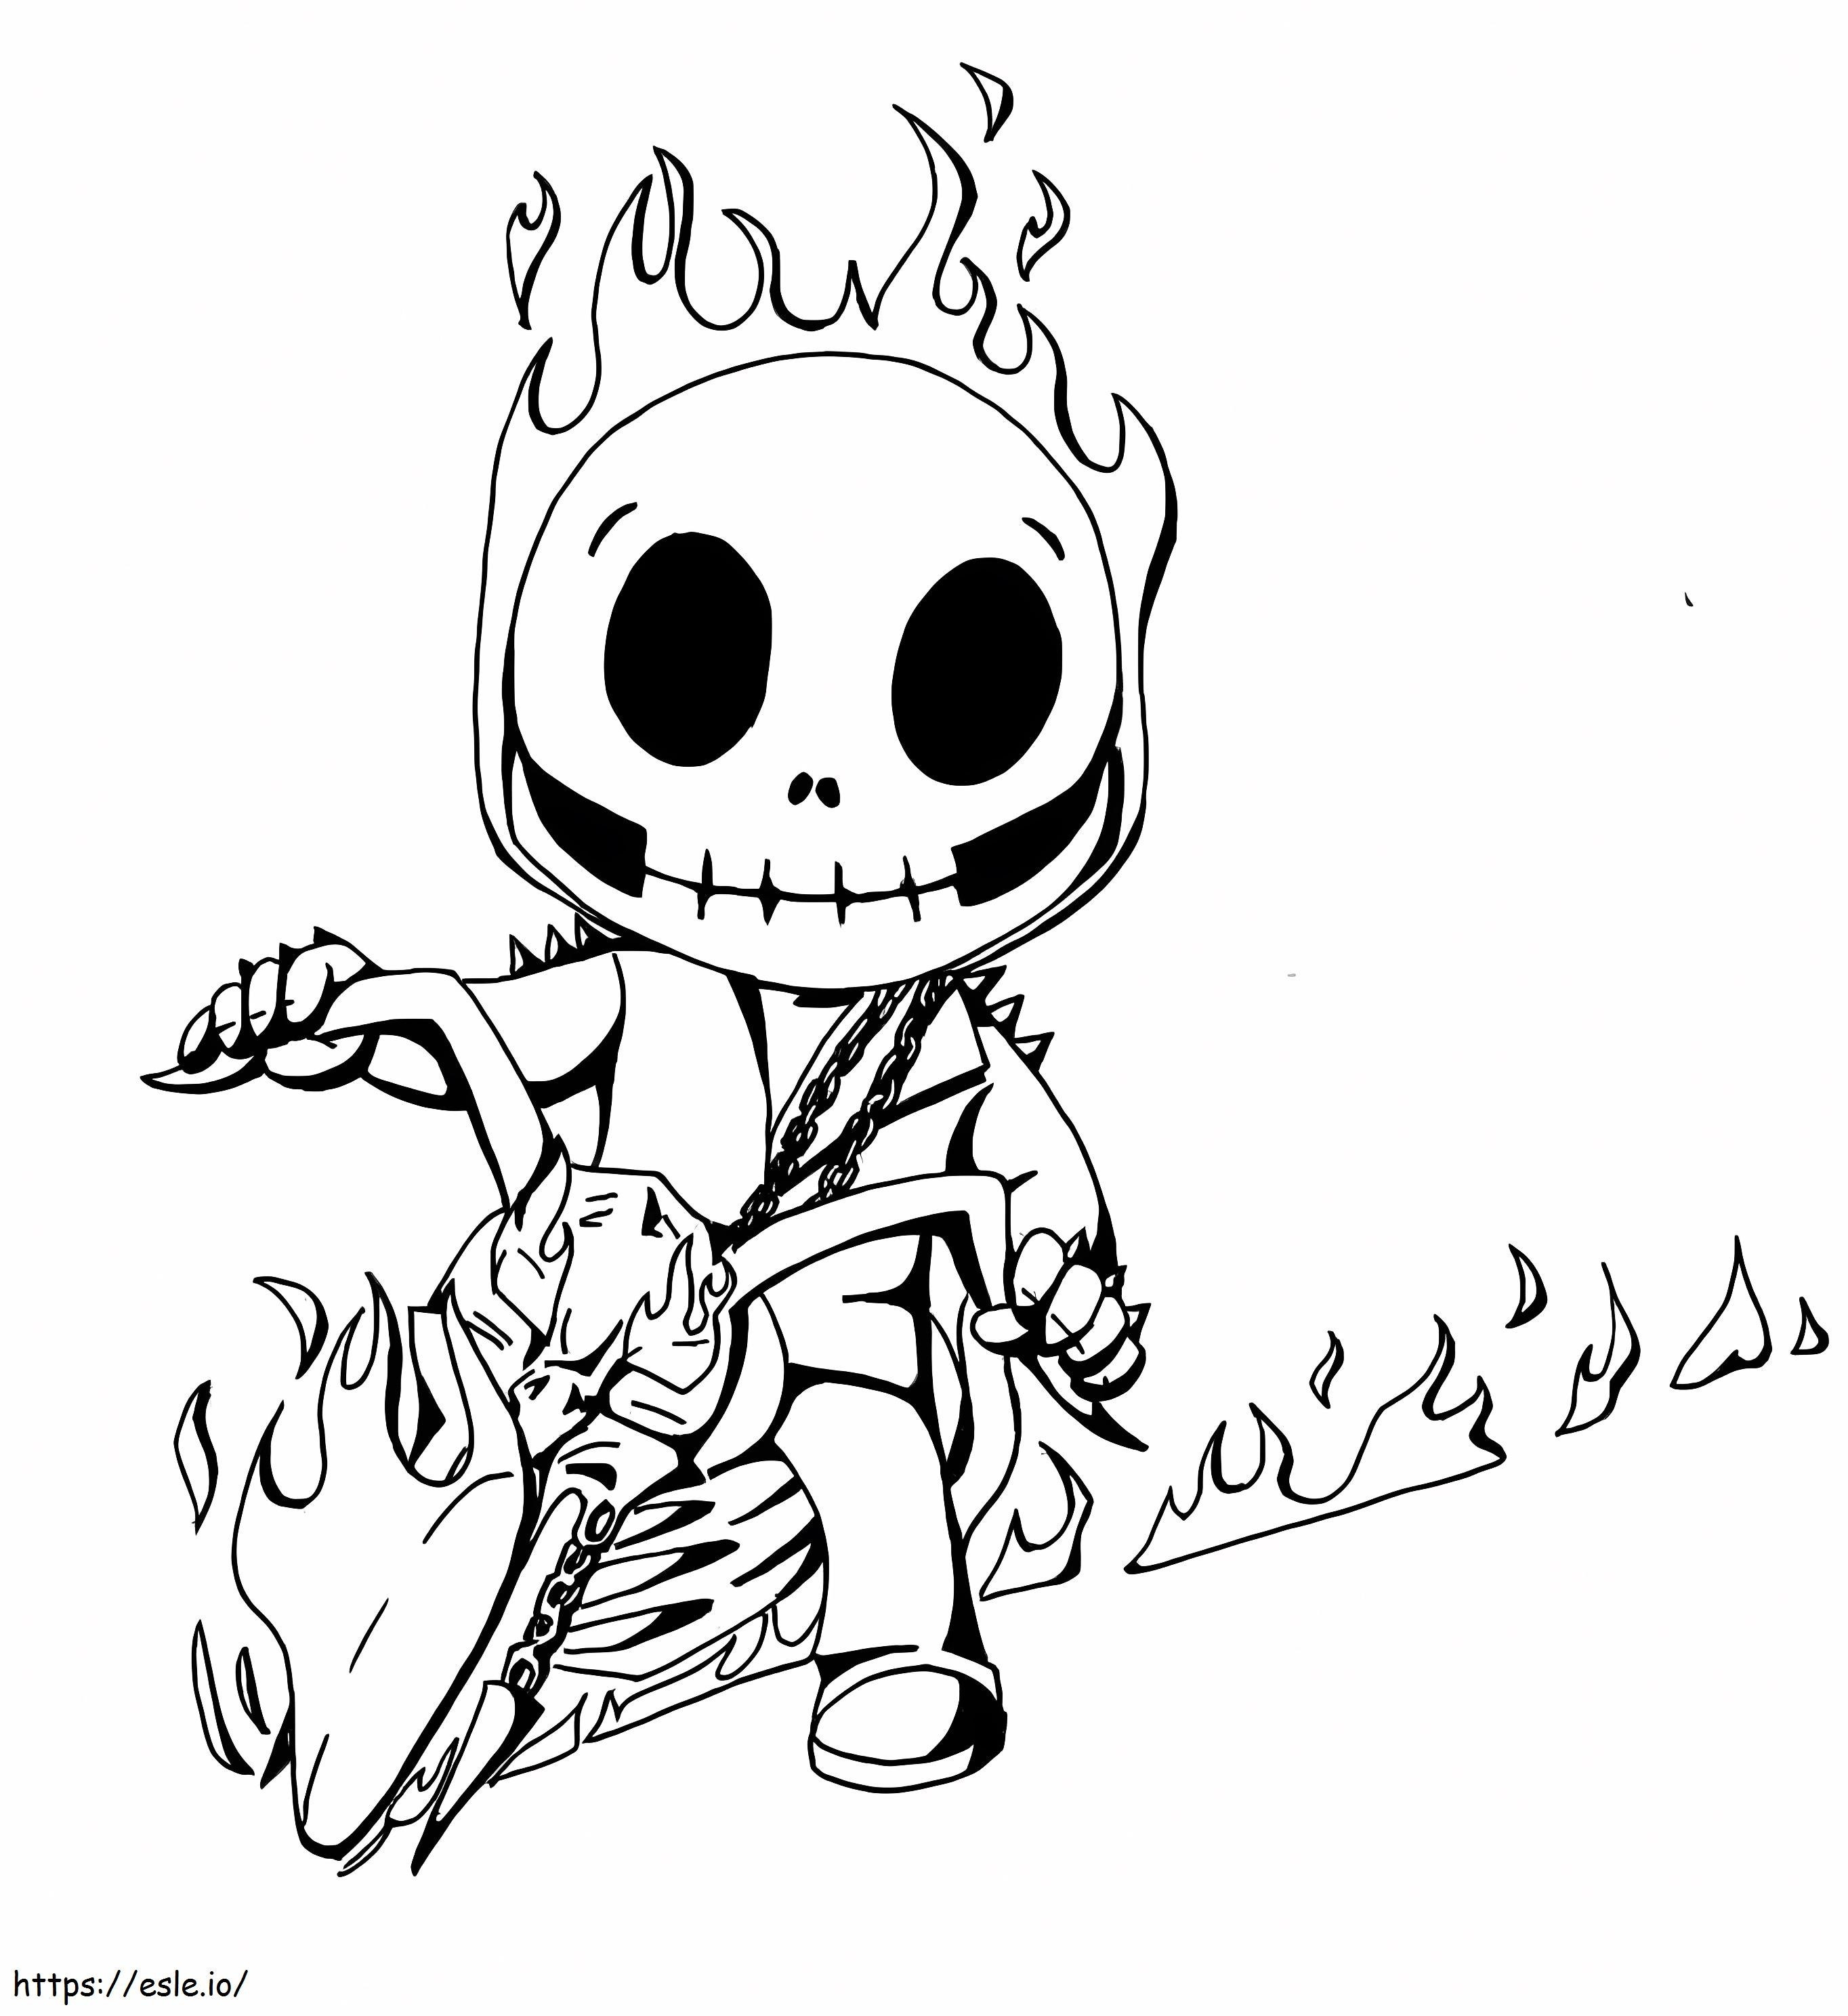 Cute Ghost Rider coloring page